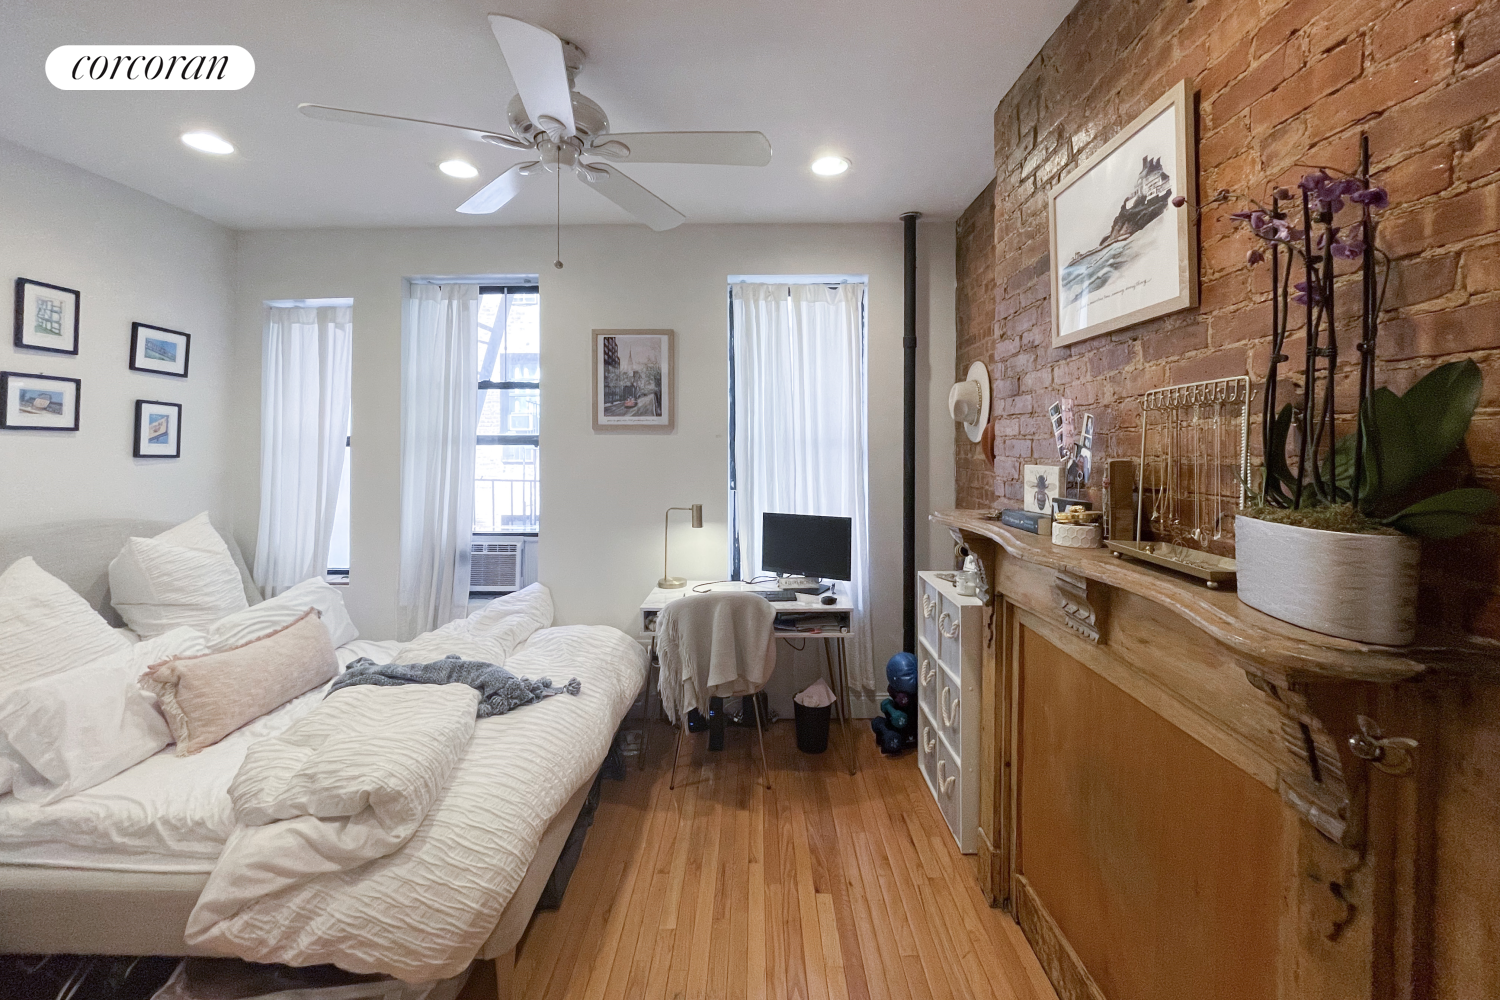 423 East 81st Street 2Re, Yorkville, Upper East Side, NYC - 1 Bedrooms  
1 Bathrooms  
3 Rooms - 